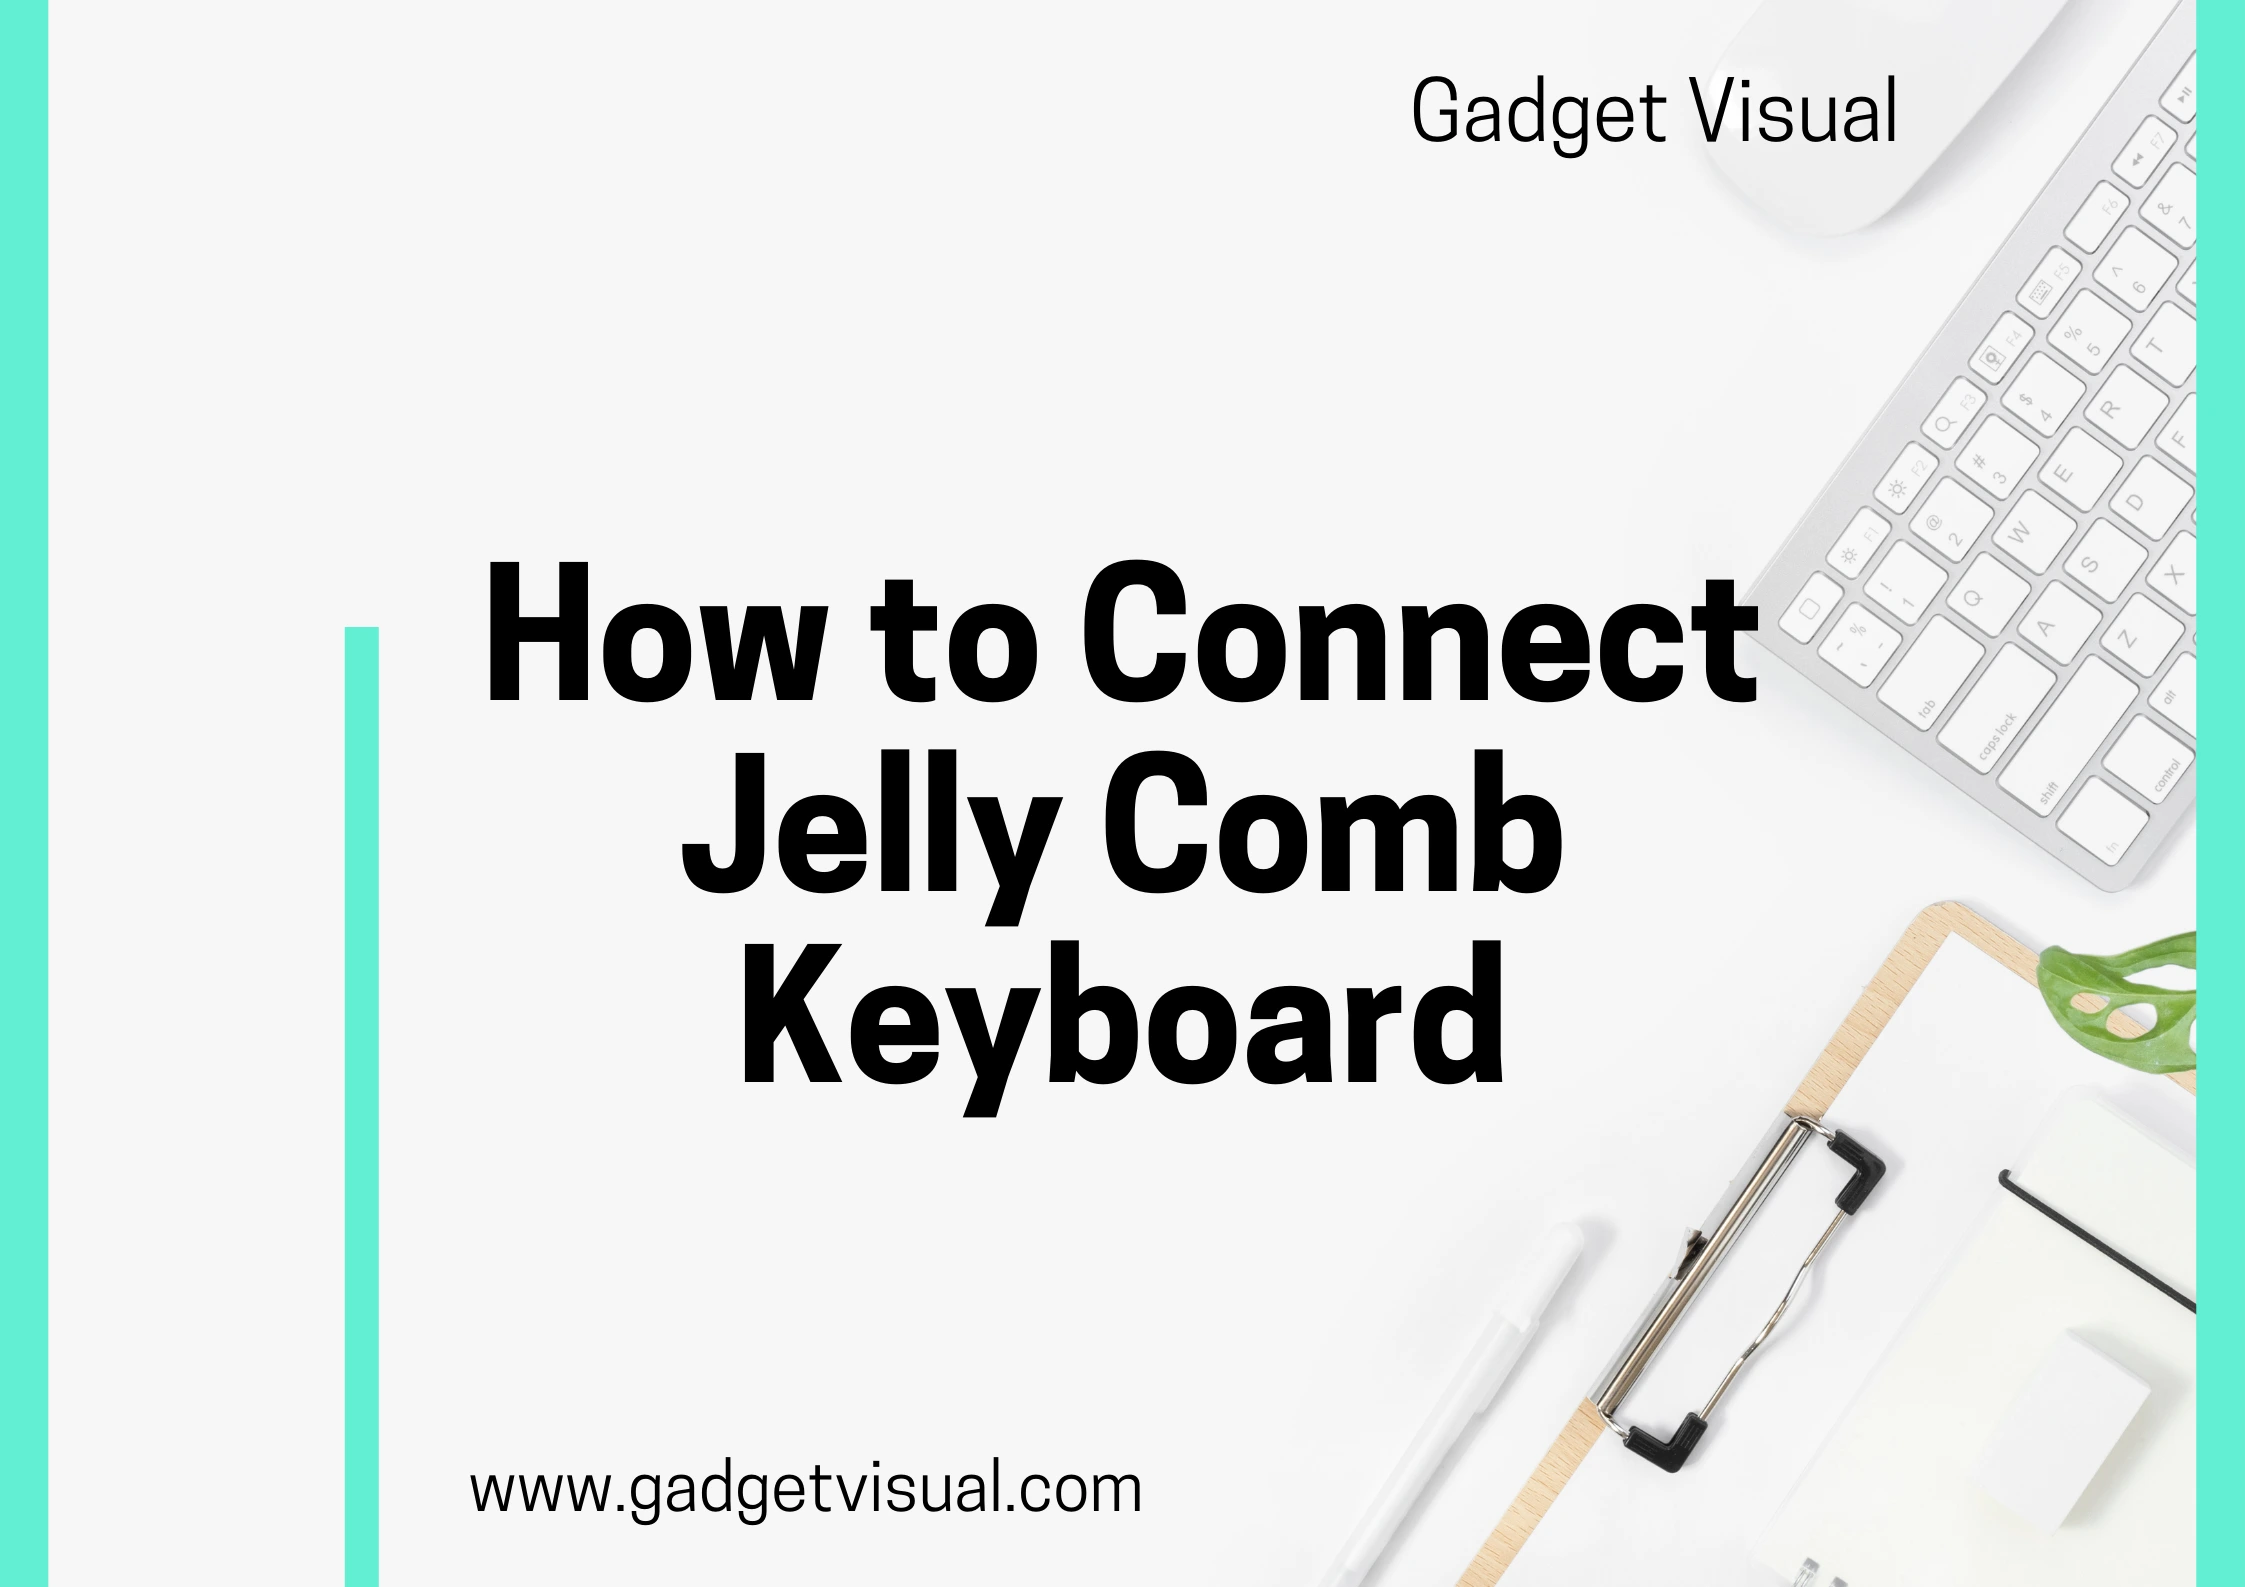 How to Connect Jelly Comb Keyboard